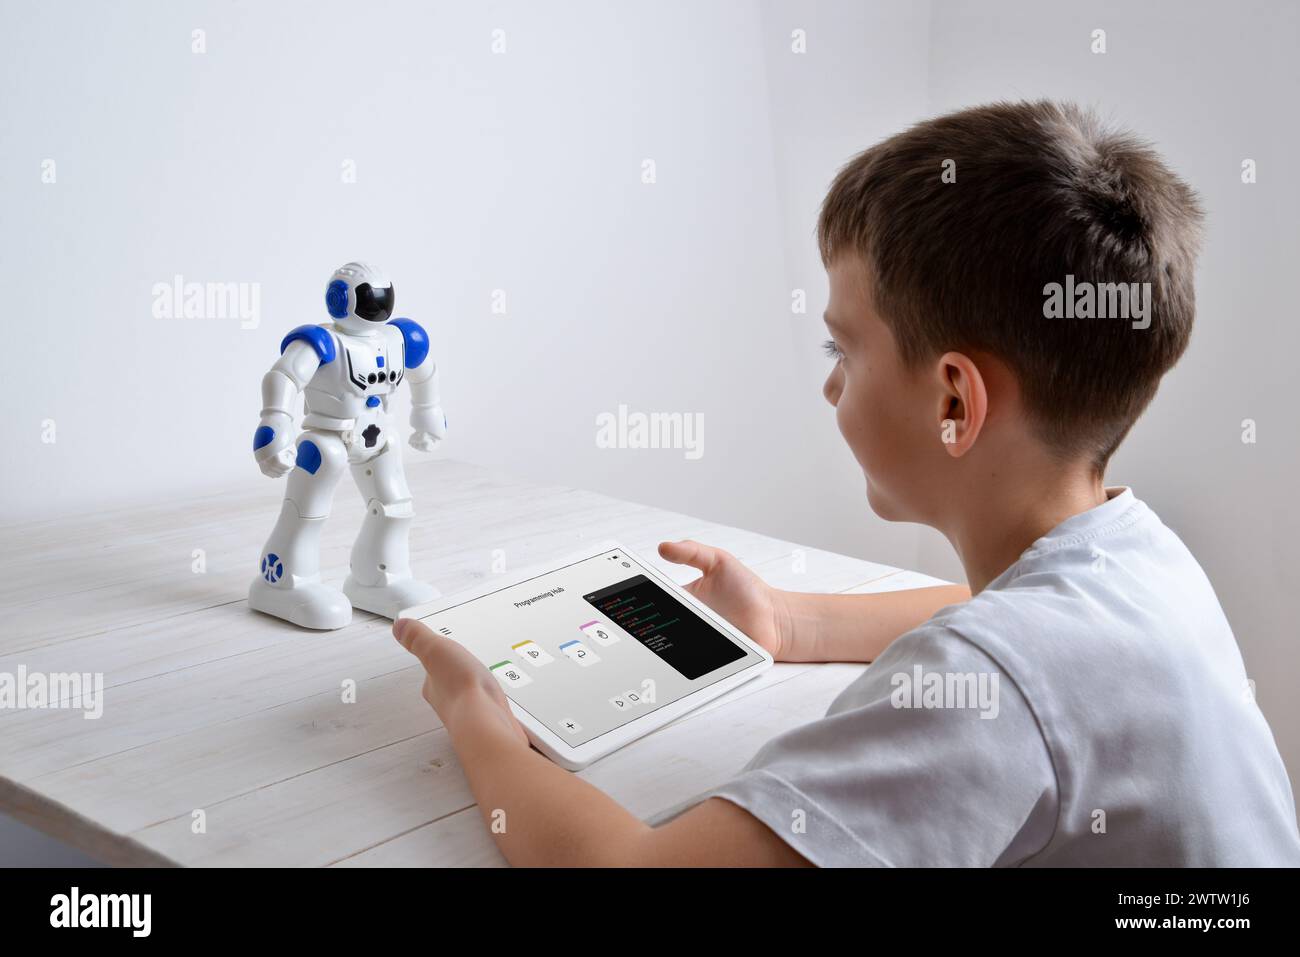 Boy is programming the work of a robot on a desk with a tablet in his hand Stock Photo